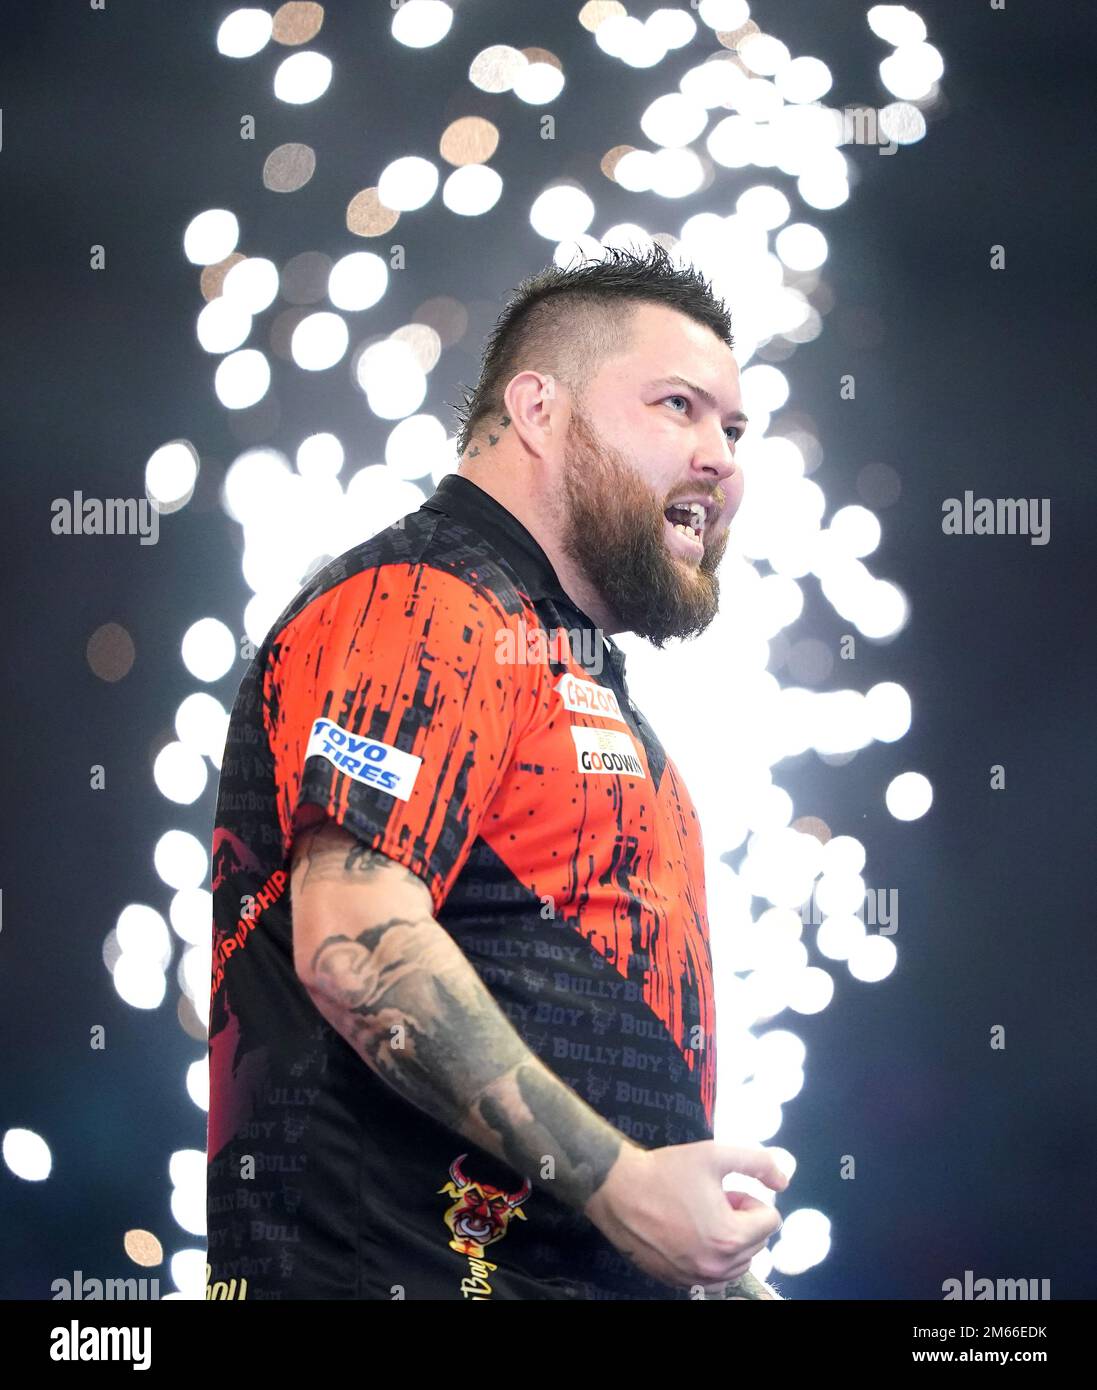 Michael smith darts stock and images -